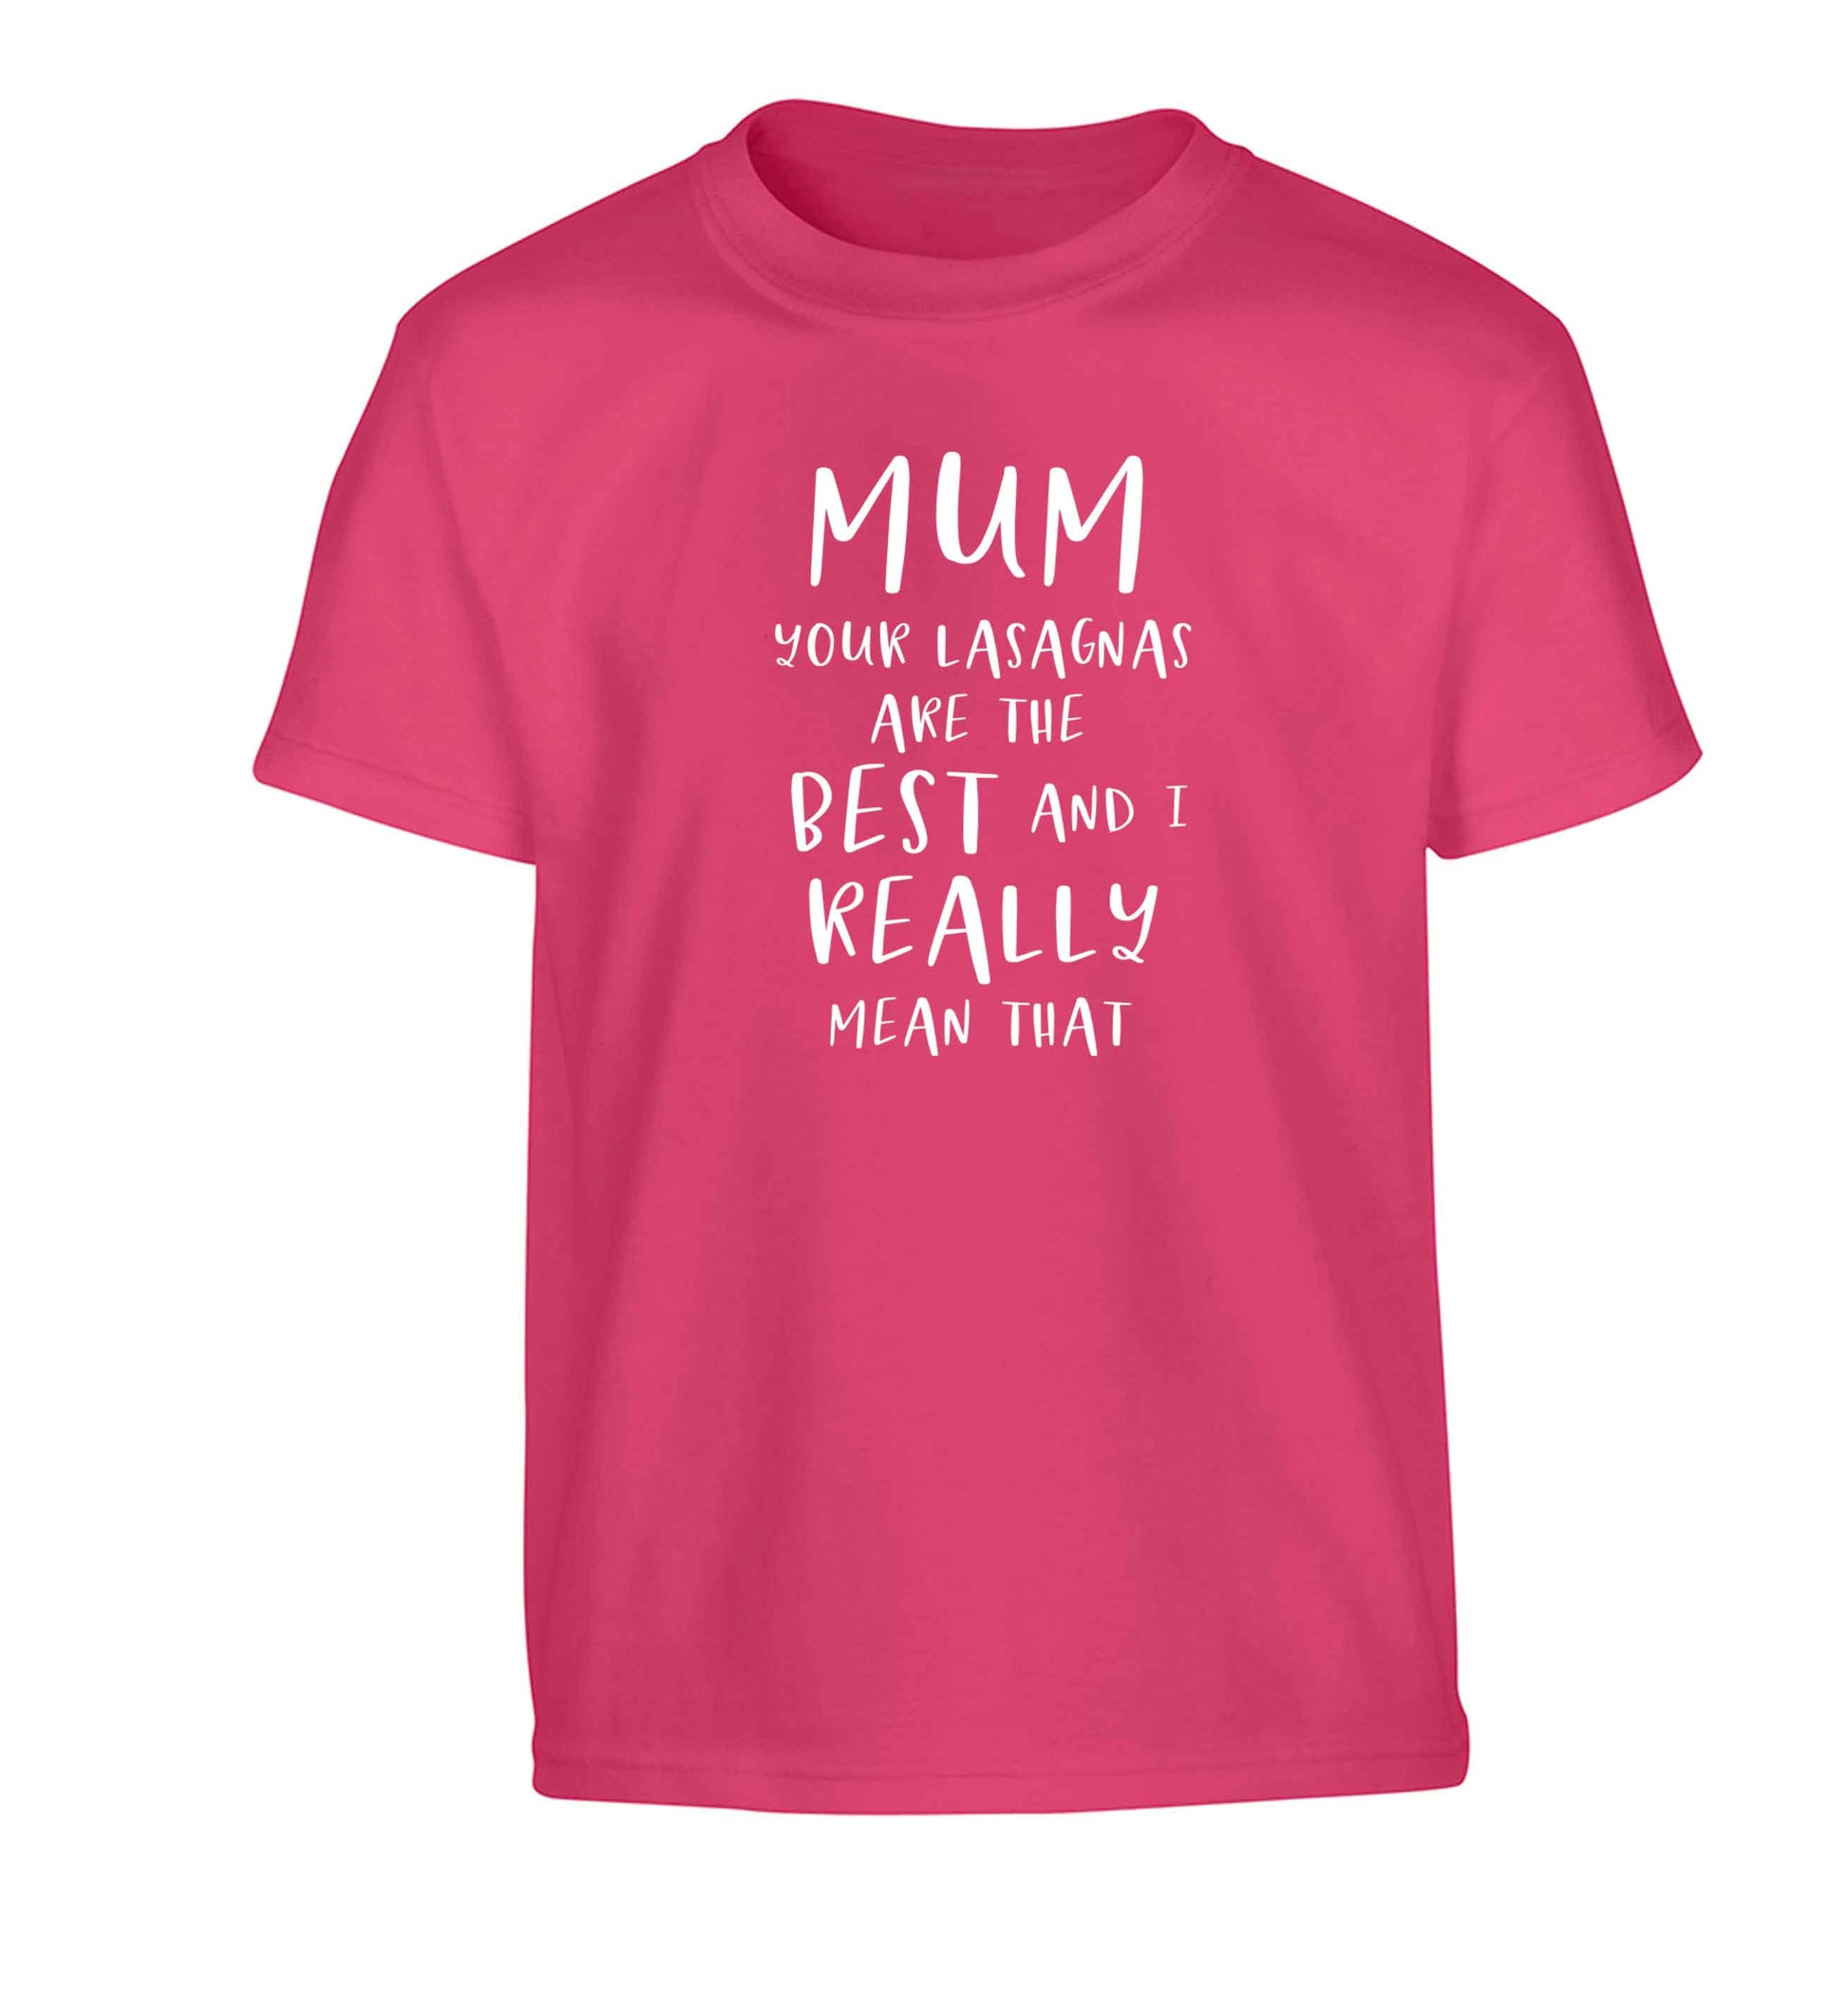 Funny gifts for your mum on mother's dayor her birthday! Mum your lasagnas are the best and I really mean that Children's pink Tshirt 12-13 Years